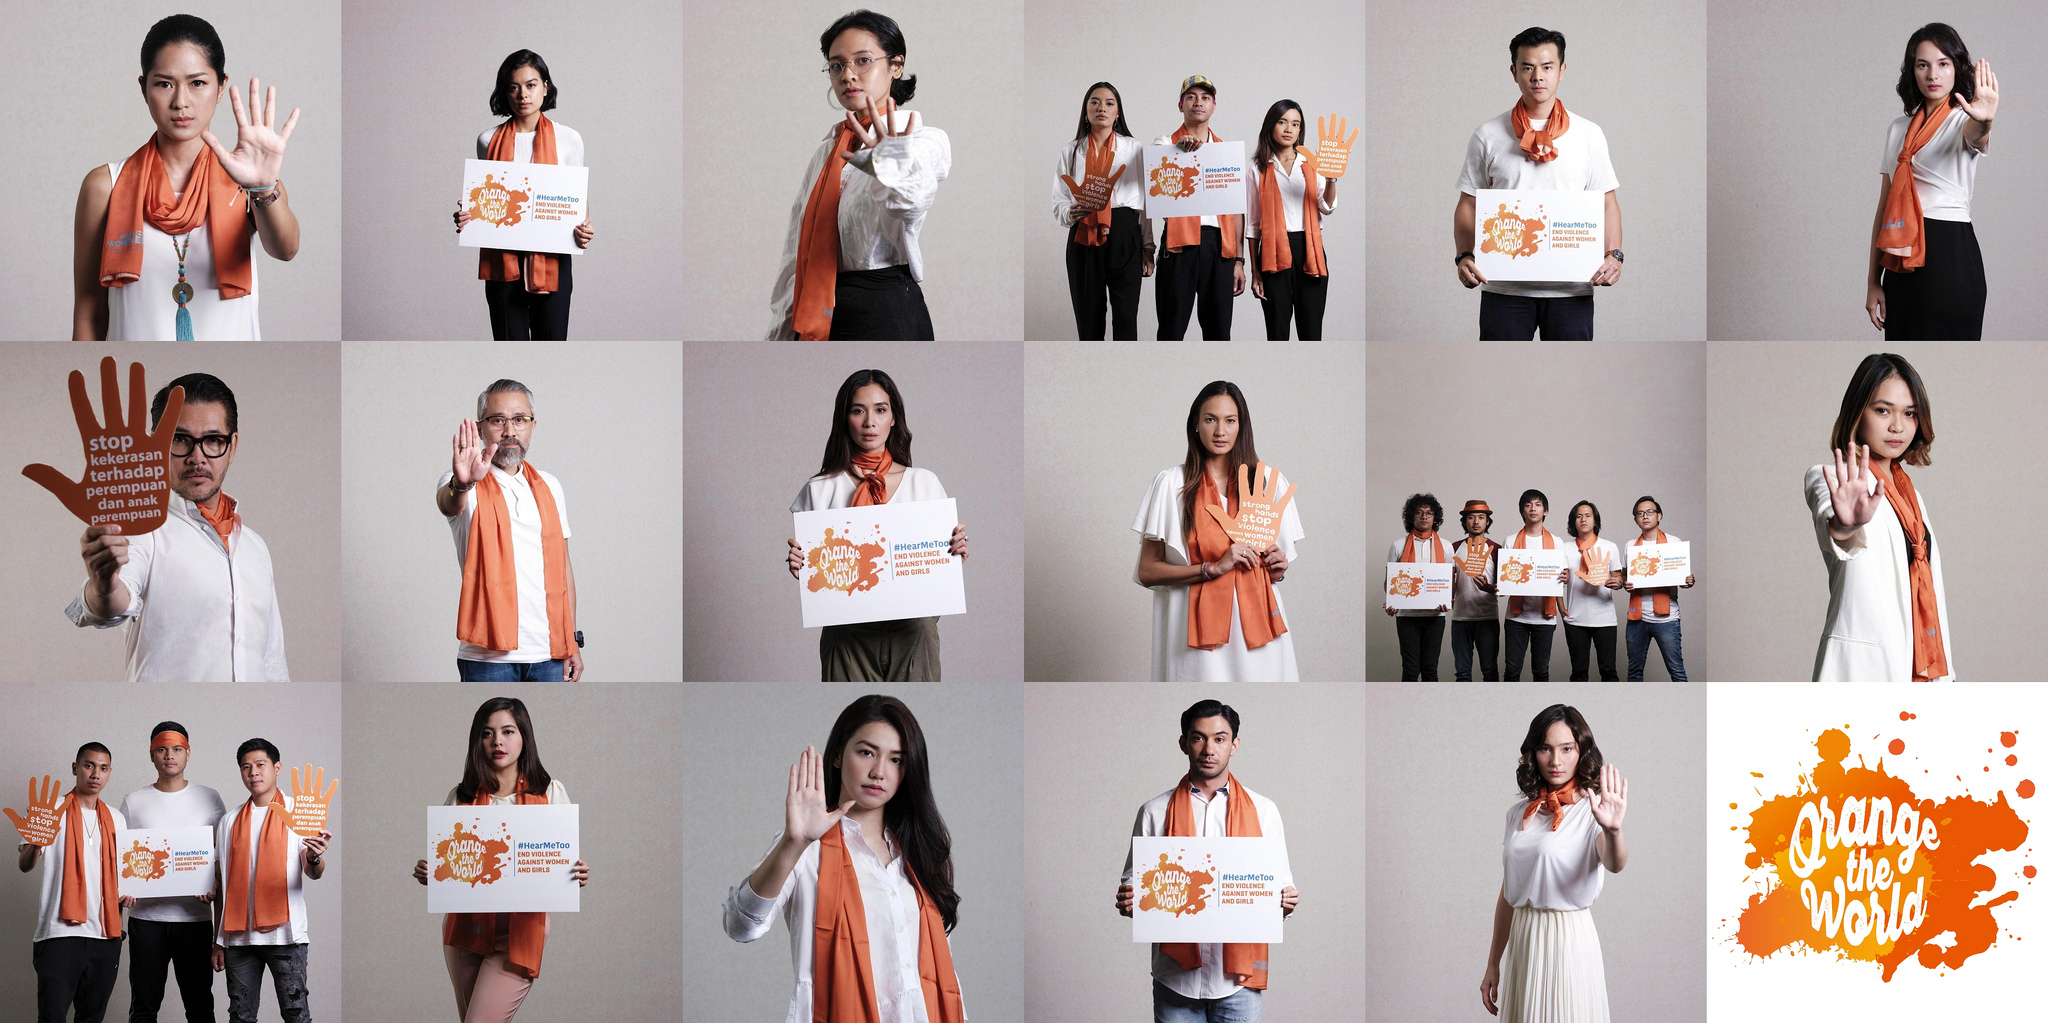 25 Indonesian influencers were participated in the video message to end violence against women. The video message was produced with the objective to encourage people to take action to end violence against women. In the video, the influencers encourage everyone to stand in solidarity with survivors, speak out, and take action to stop normalizing violence against women and girls. The video was published on the 25th November 2018 to mark 16 Days of Activism against Gender Based Violence. Photo: UN Women/Putra Djohan